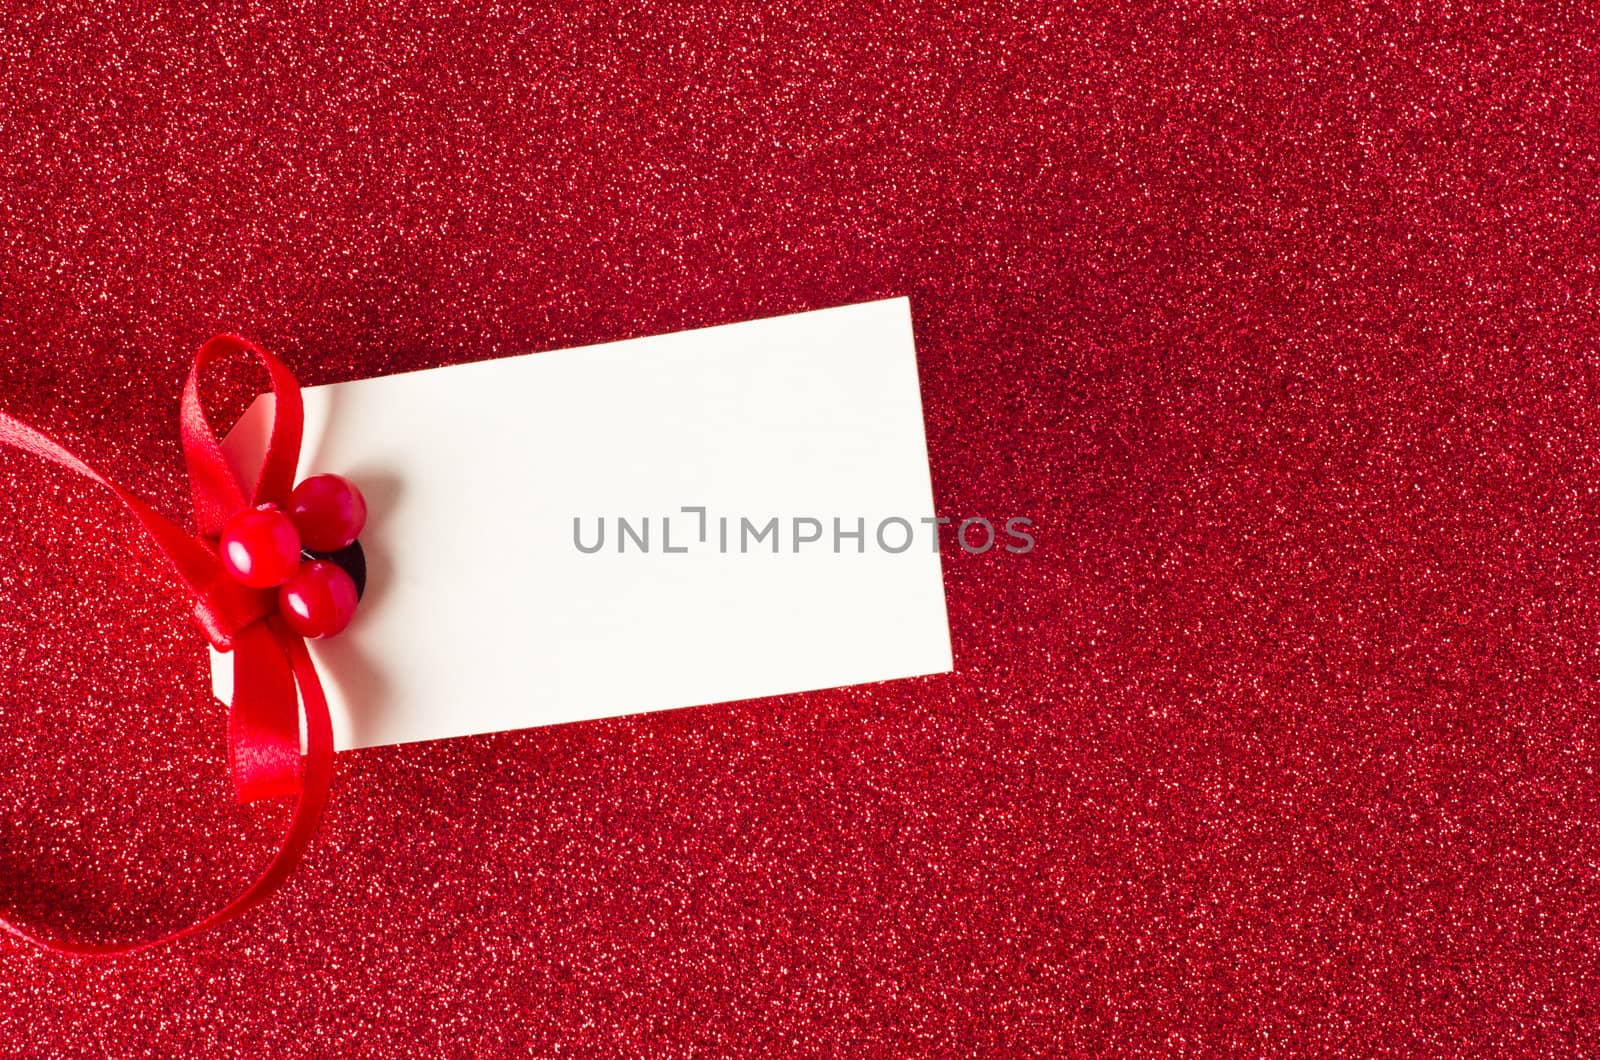 A blank Christmas gift tag, decorated with red ribbon and artifical holly berries, on a sparkly red glitter background.  Copy space on tag.